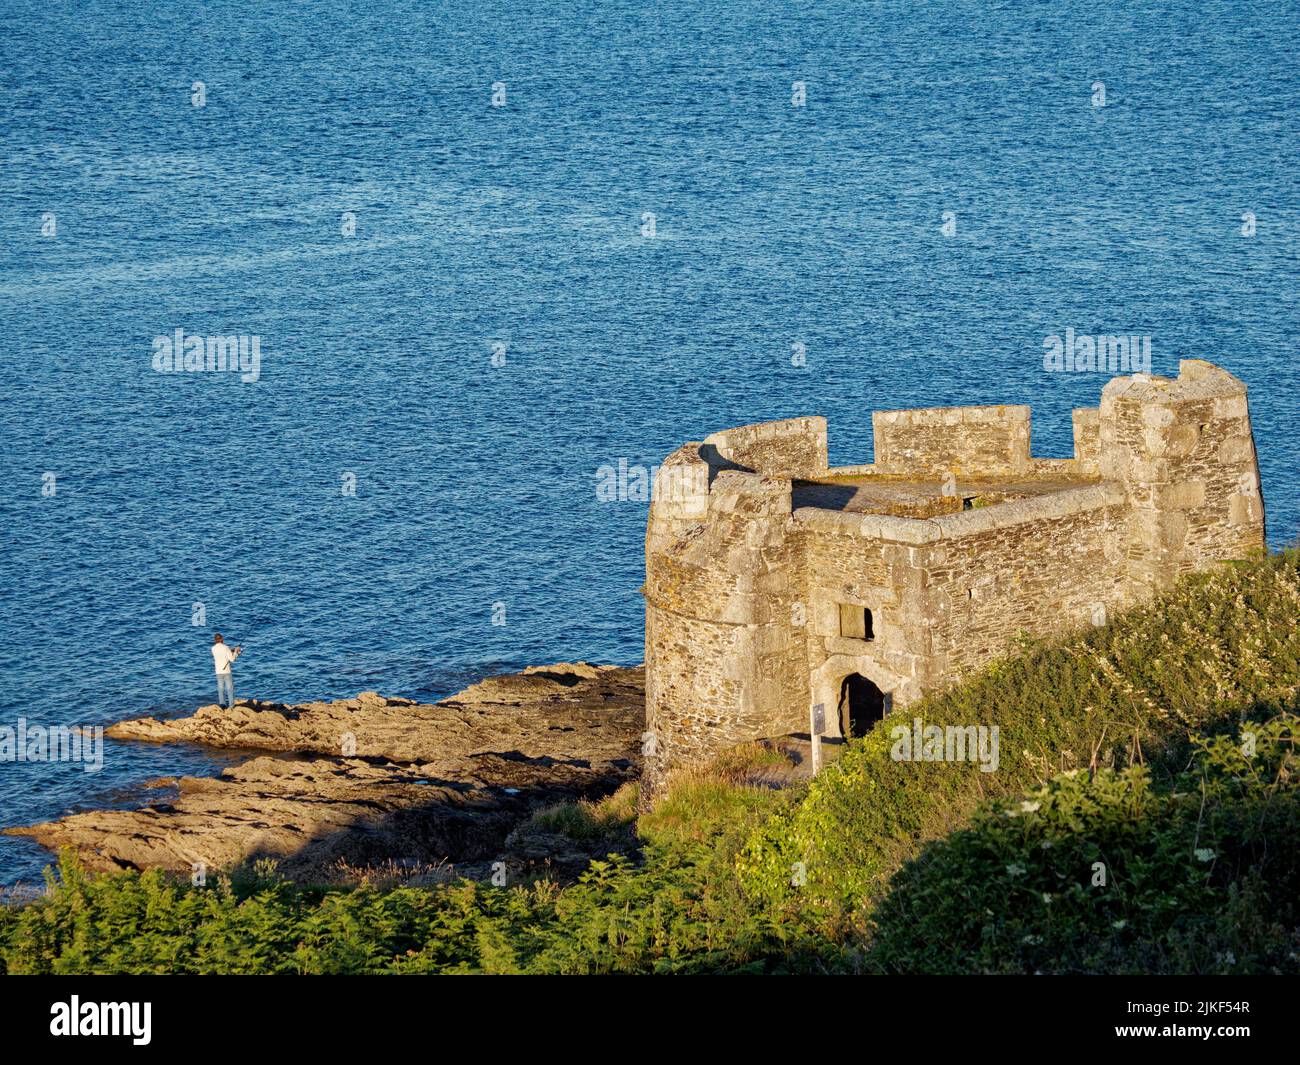 Man Fishing, Rocks and Castle, Little Dennis Fort,  Pendennis Point, Falmouth, Cornwall, England, UK, GB. Stock Photo